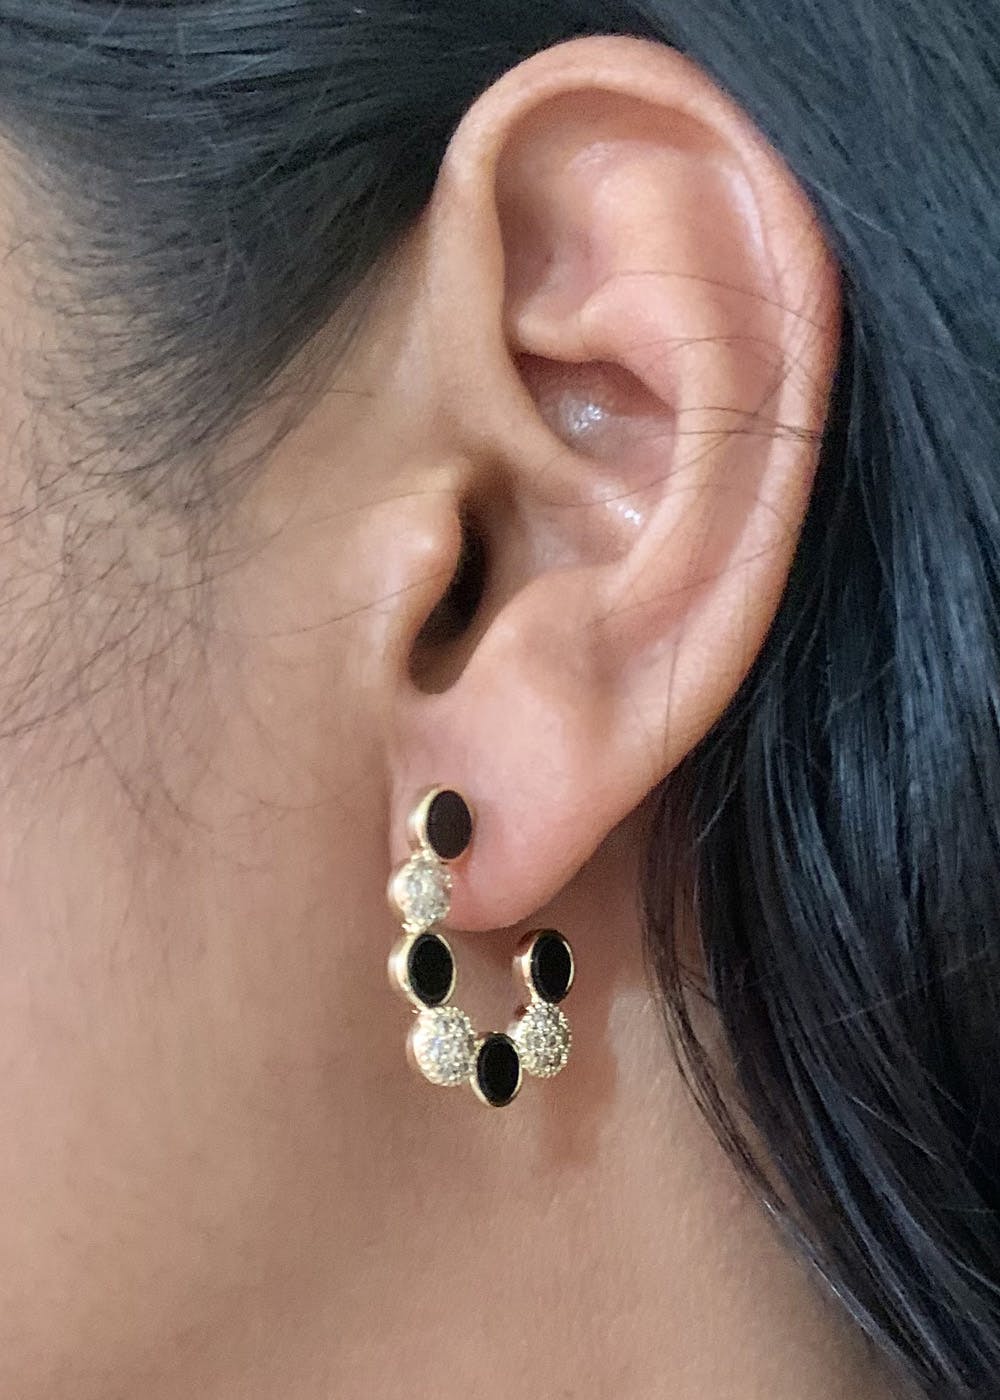 Single Black stone Flower design handmade 925 sterling silver stud earring  best daily use vintage style jewelry from India ear1207  TRIBAL ORNAMENTS